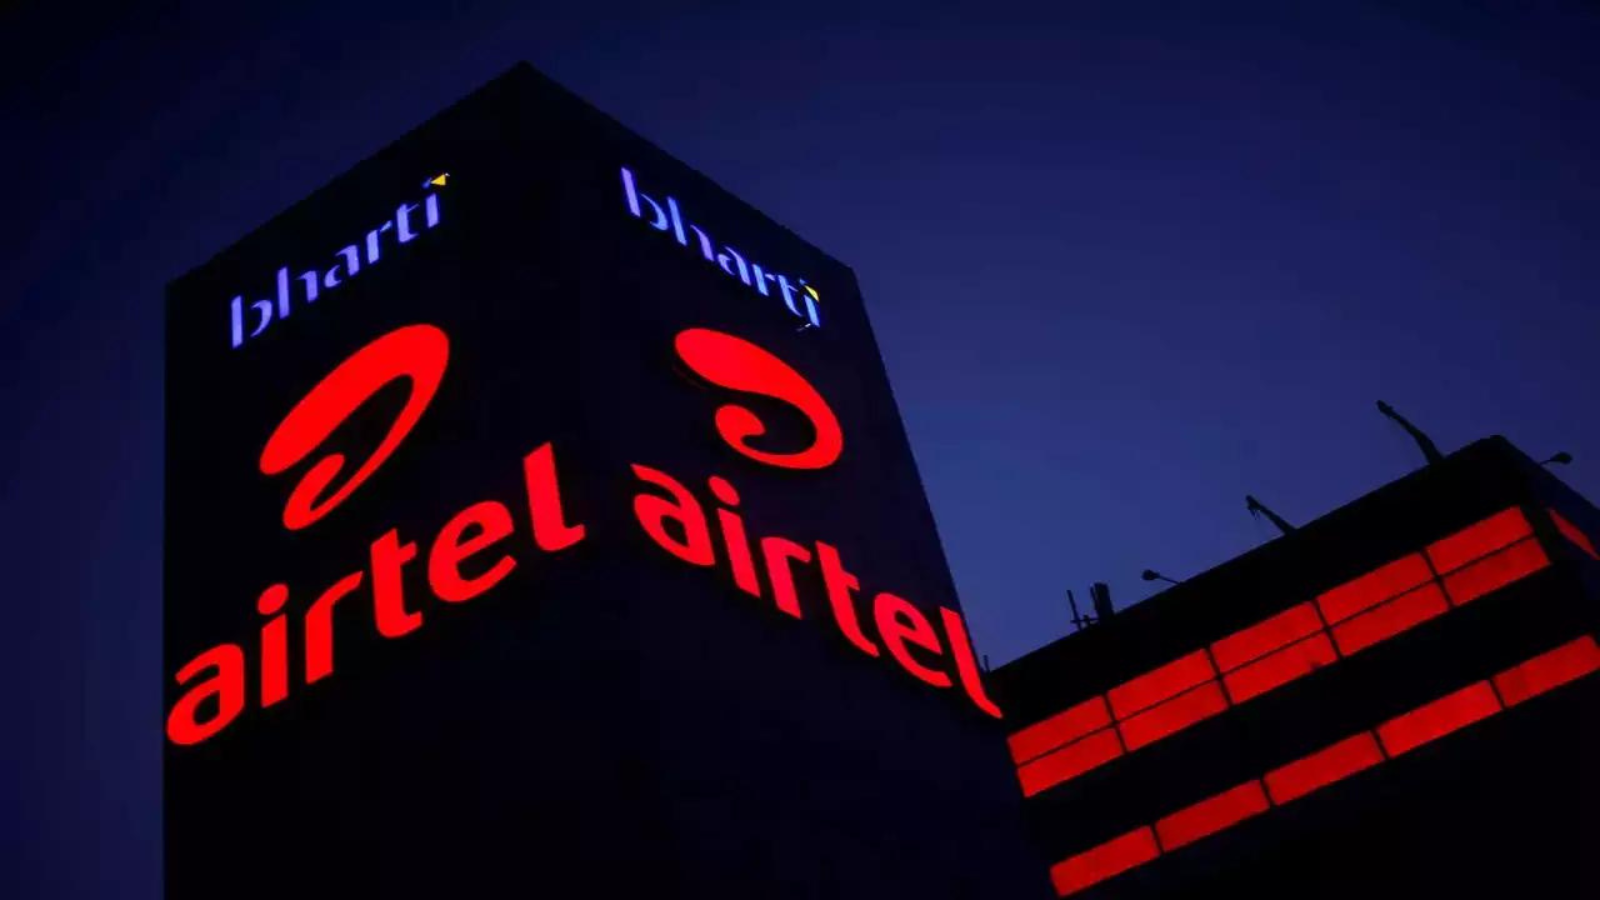 cci approves airtel's buyout in dth arm